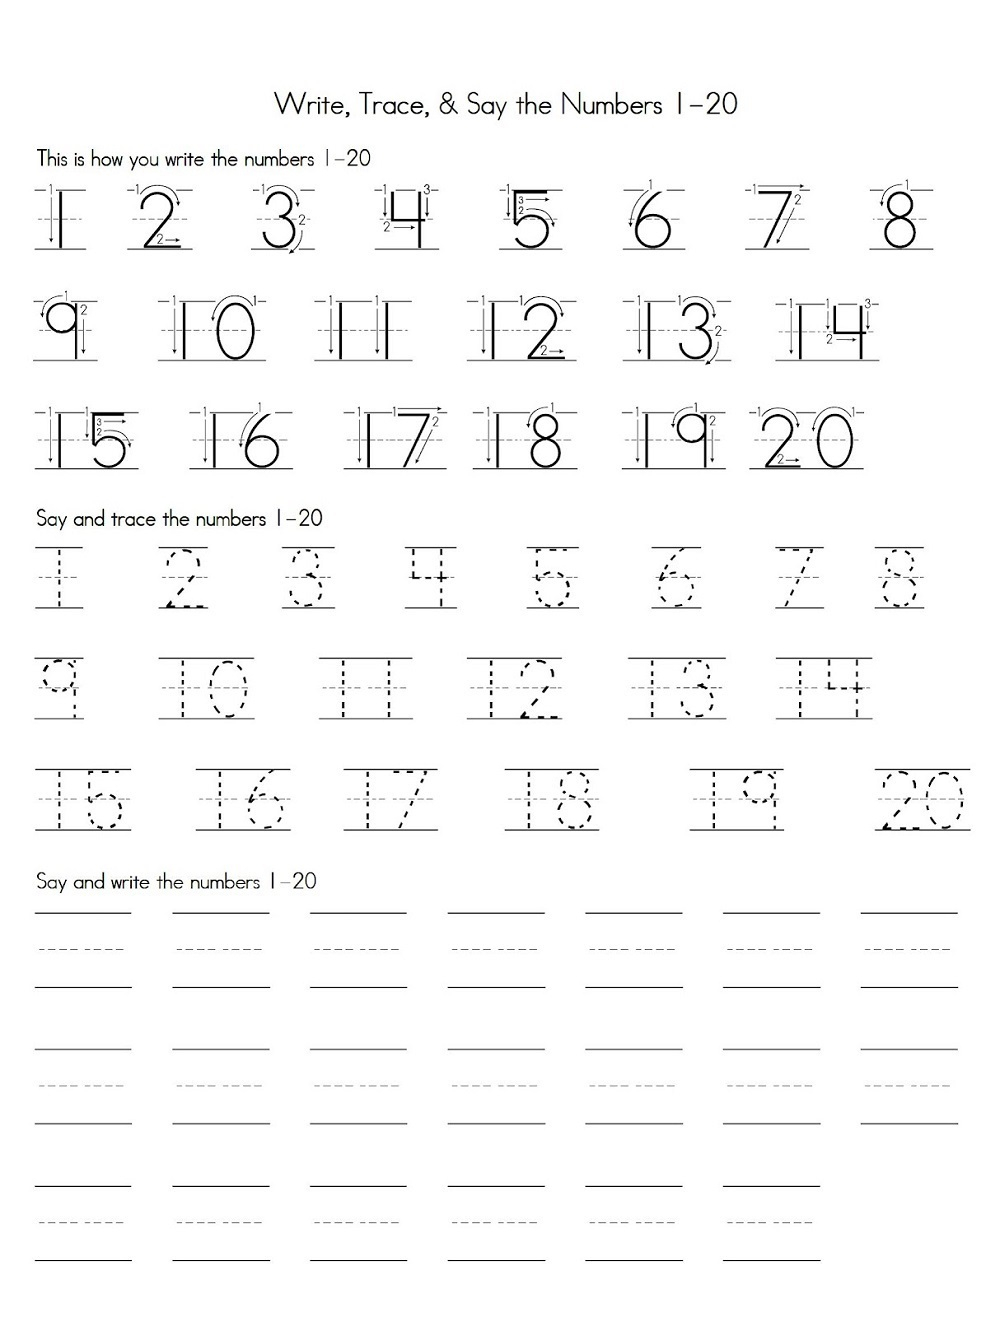 Coloring Book : Free Printable Tracing Numbers Coloring Book pertaining to Tracing Letters And Numbers